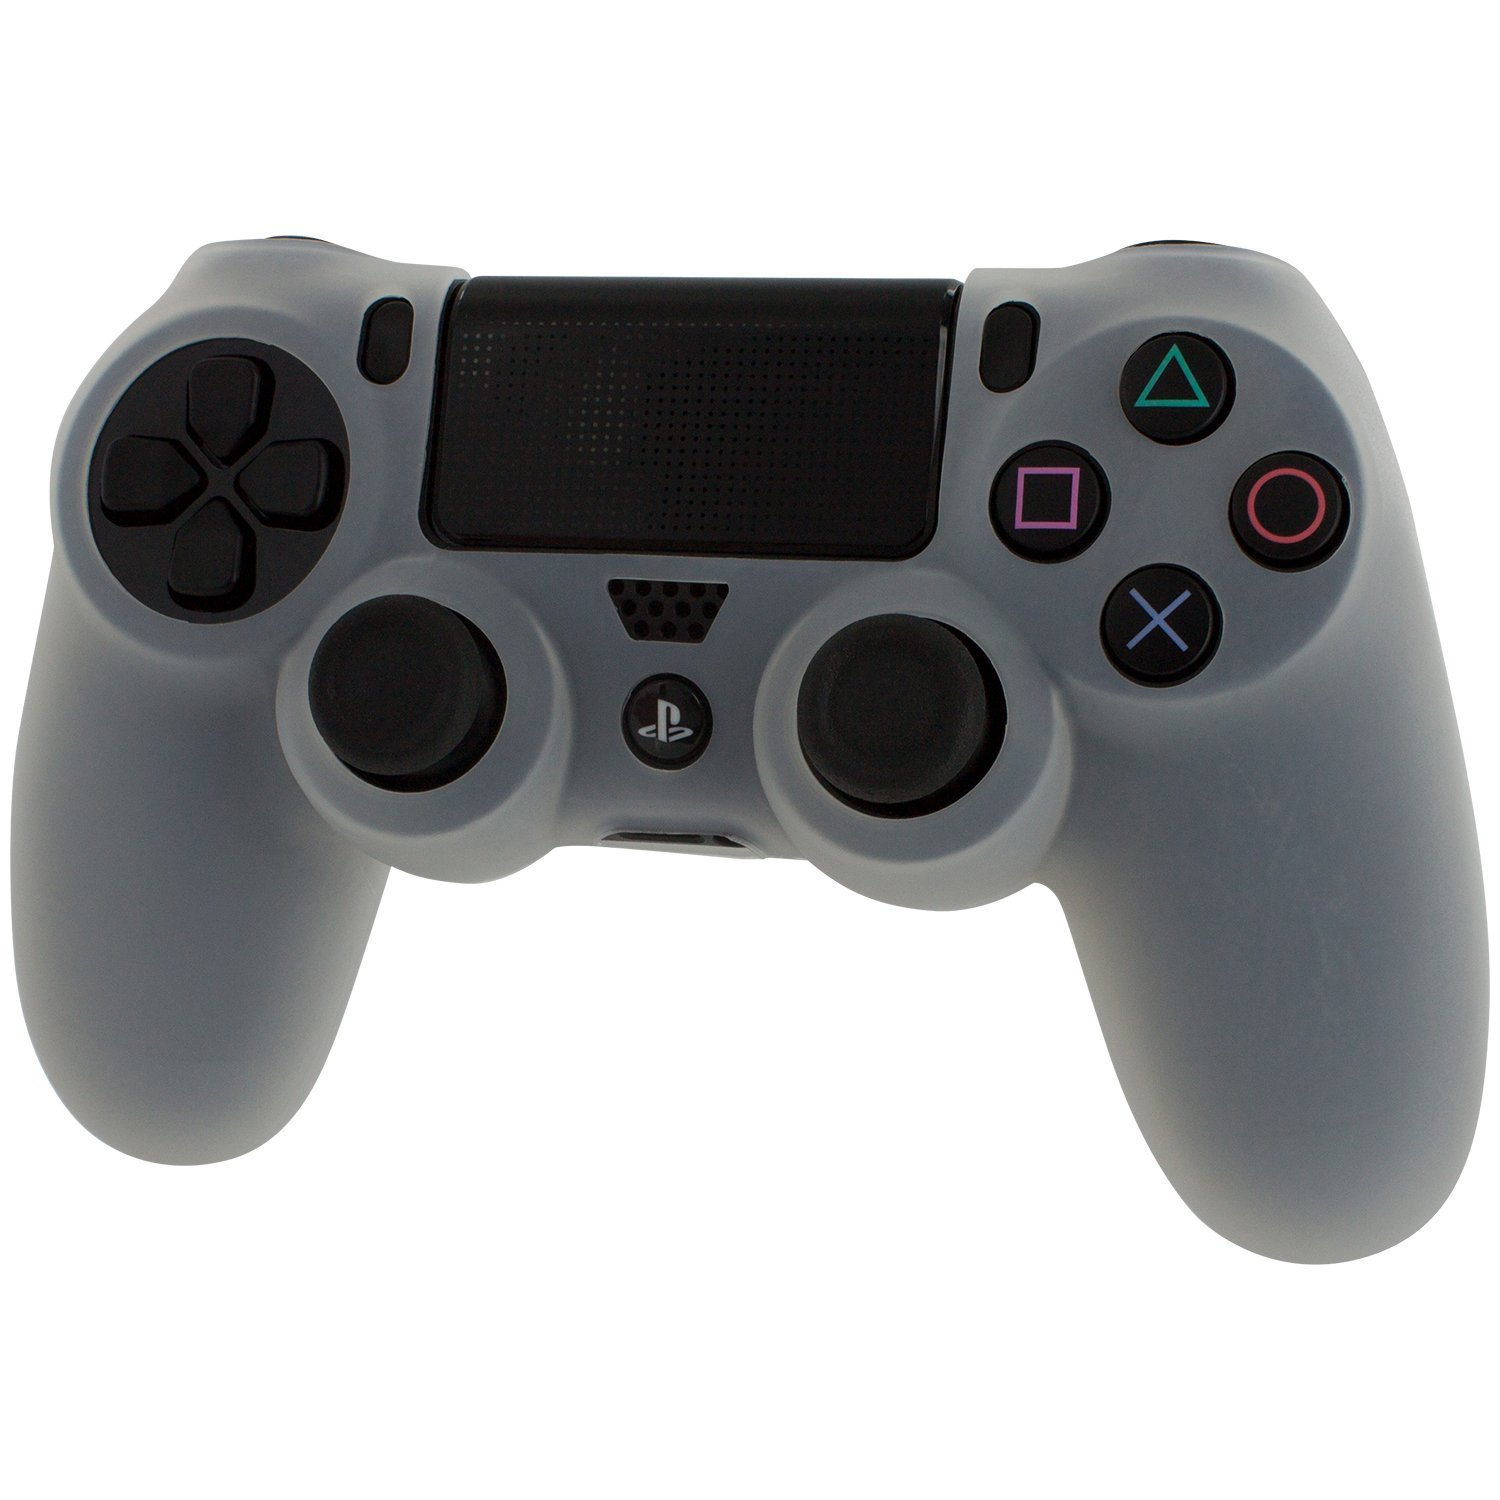 sony srx controller software